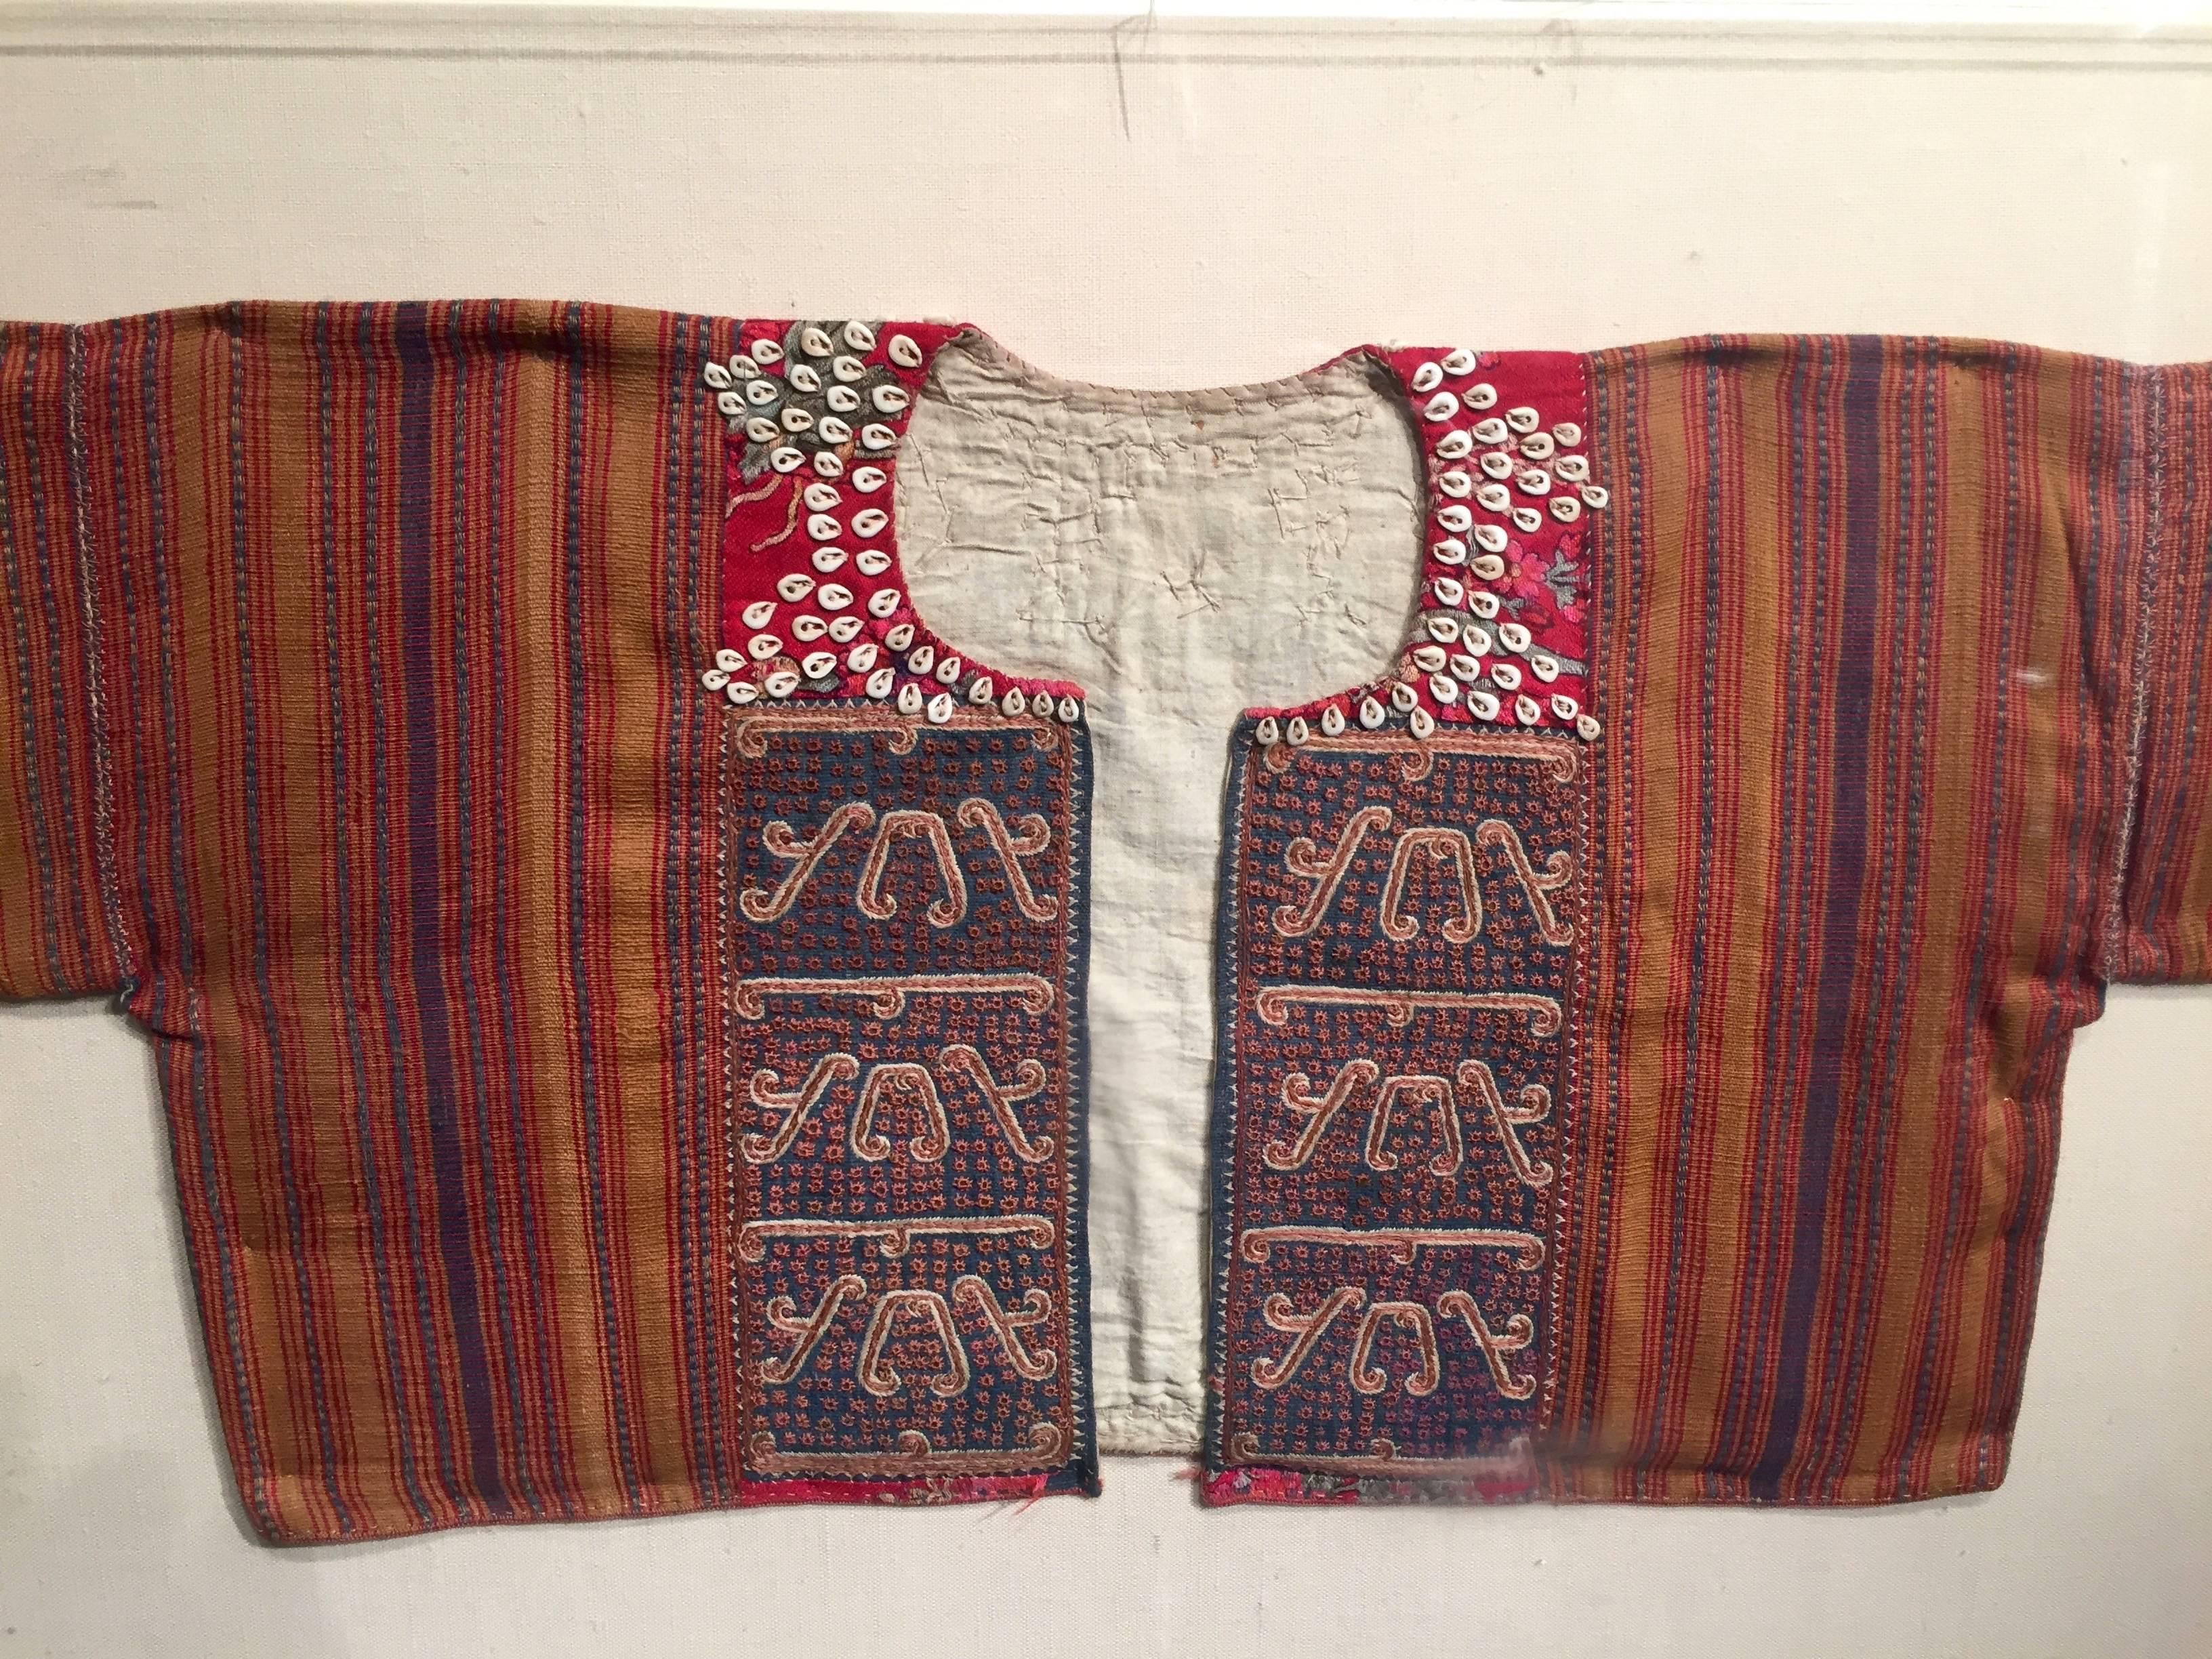 
A patterned ceremonial jacket from Sumatra, likely made for special occasions, and worn by children. Early 20th century.
Mounted on canvas under plexi glass.
The plexi measures 18